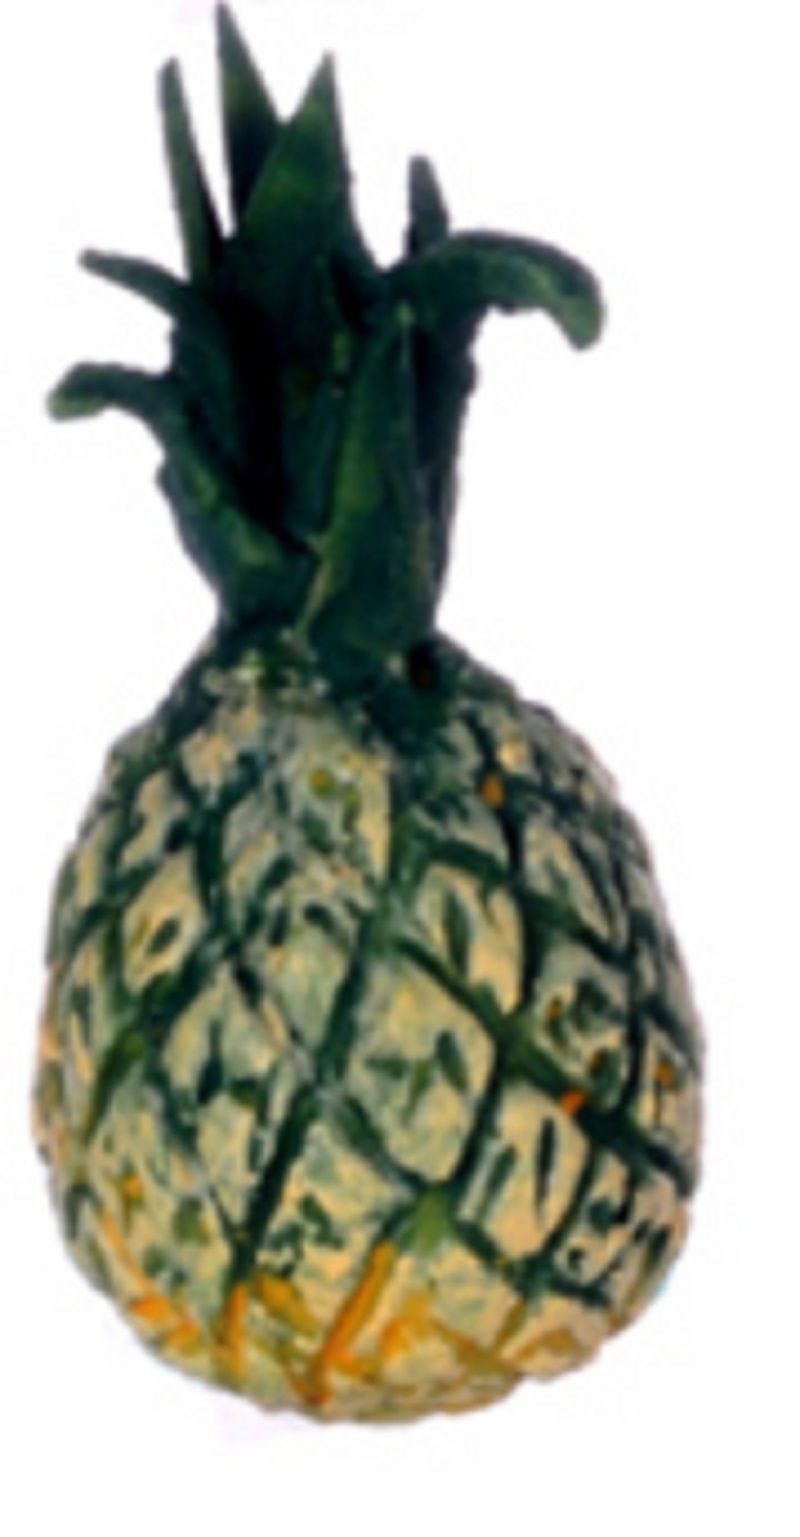 Hand Crafted Green Pineapple by Falcon Miniatures